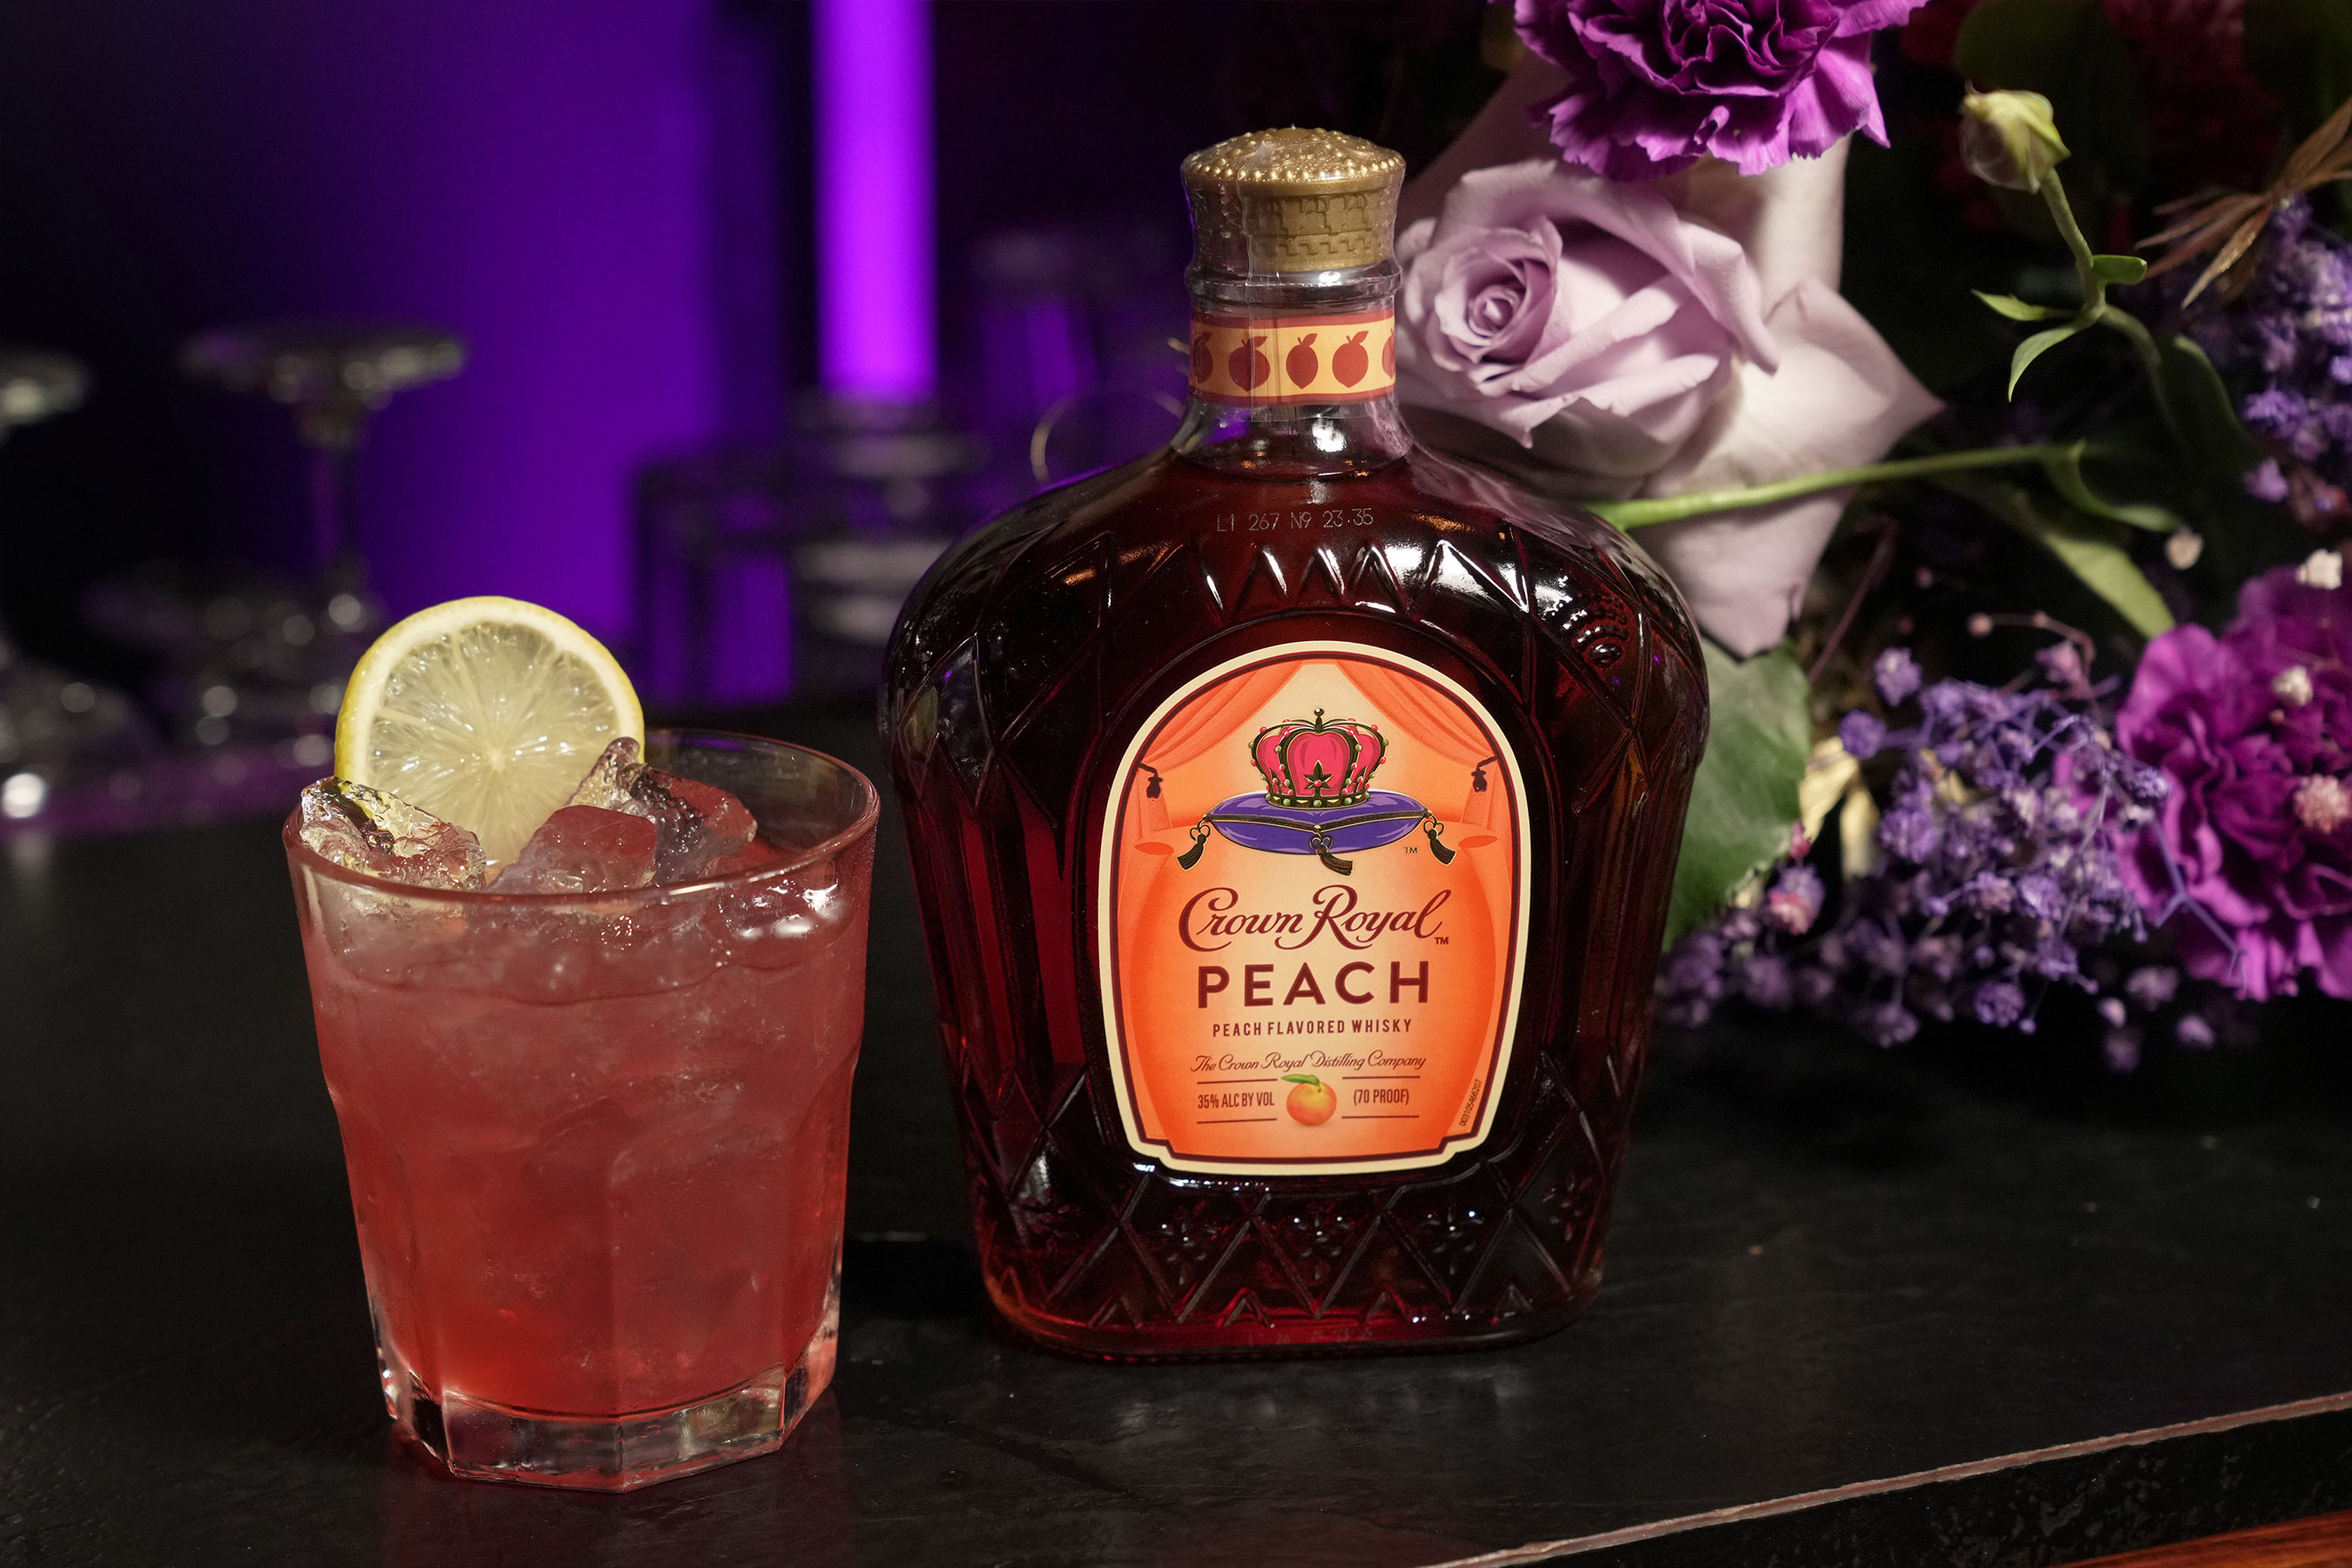 Crown Royal continues its mission of serving those who serve us with a Night of Service Generosity Hour ahead of Thanksgiving at renowned music venue Tipitina’s in New Orleans.